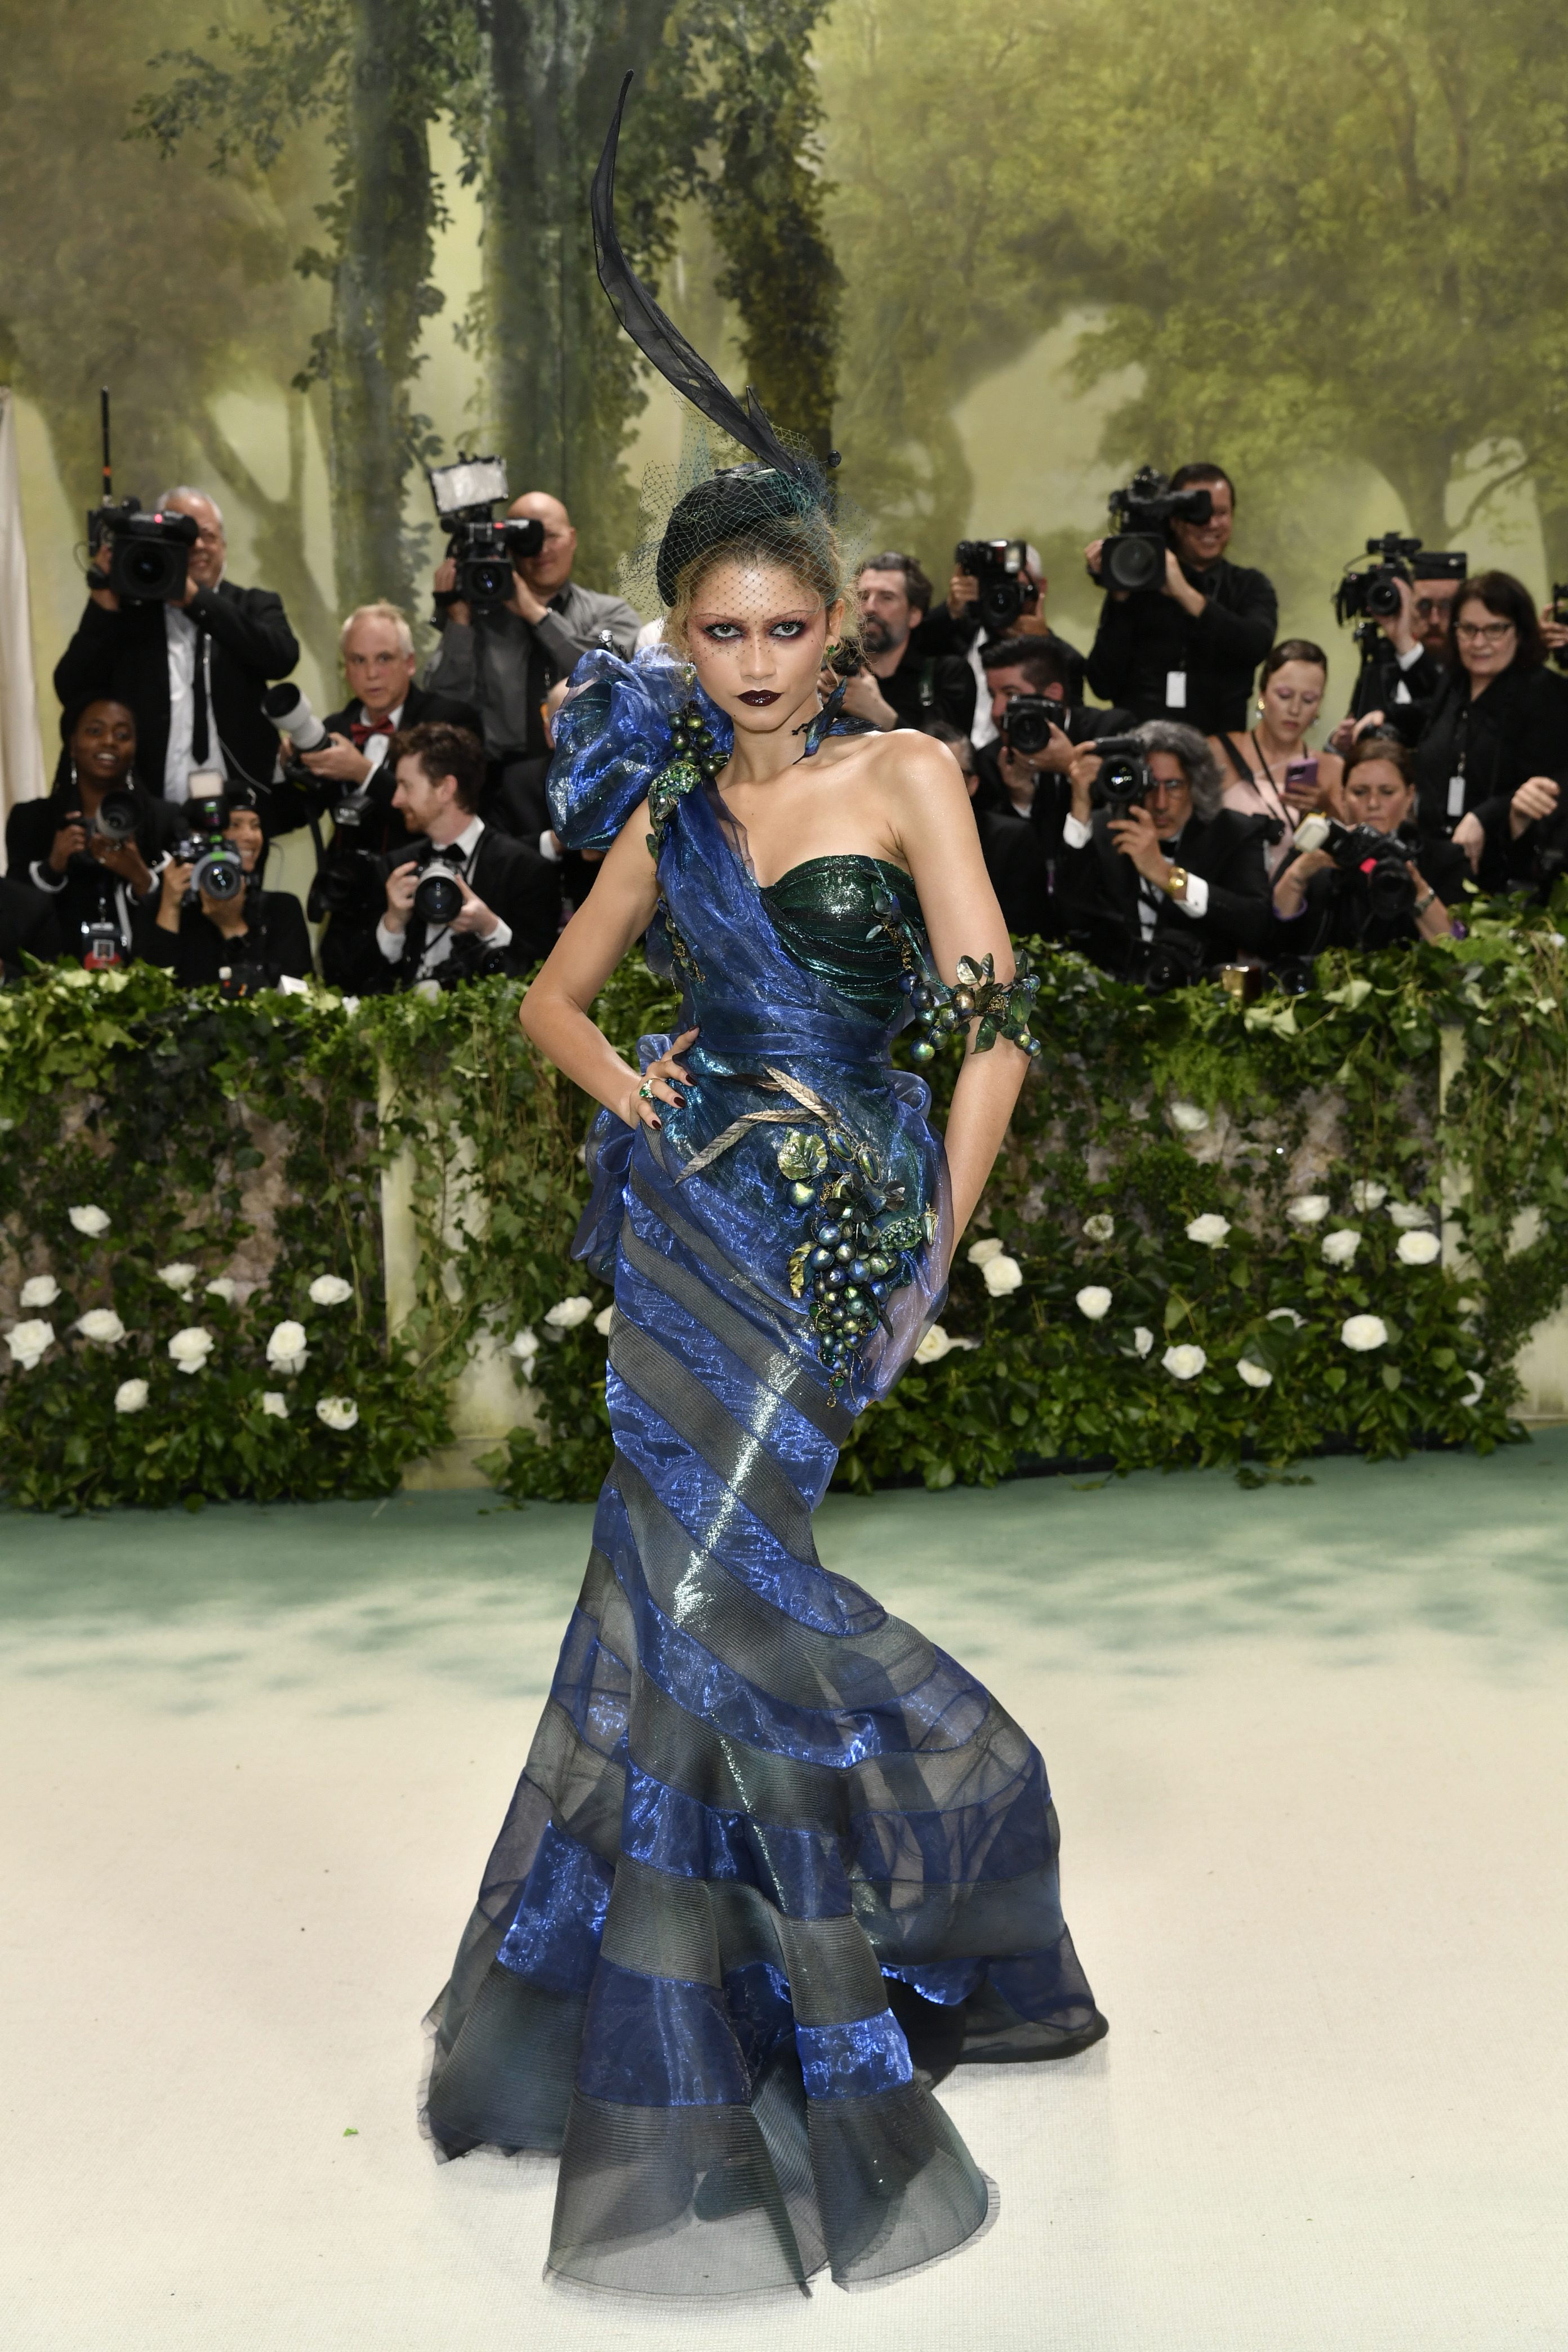 Zendaya wearing a dark green and blue fitted mermaid dress with a dark green headpiece with a tall feather-like detail 